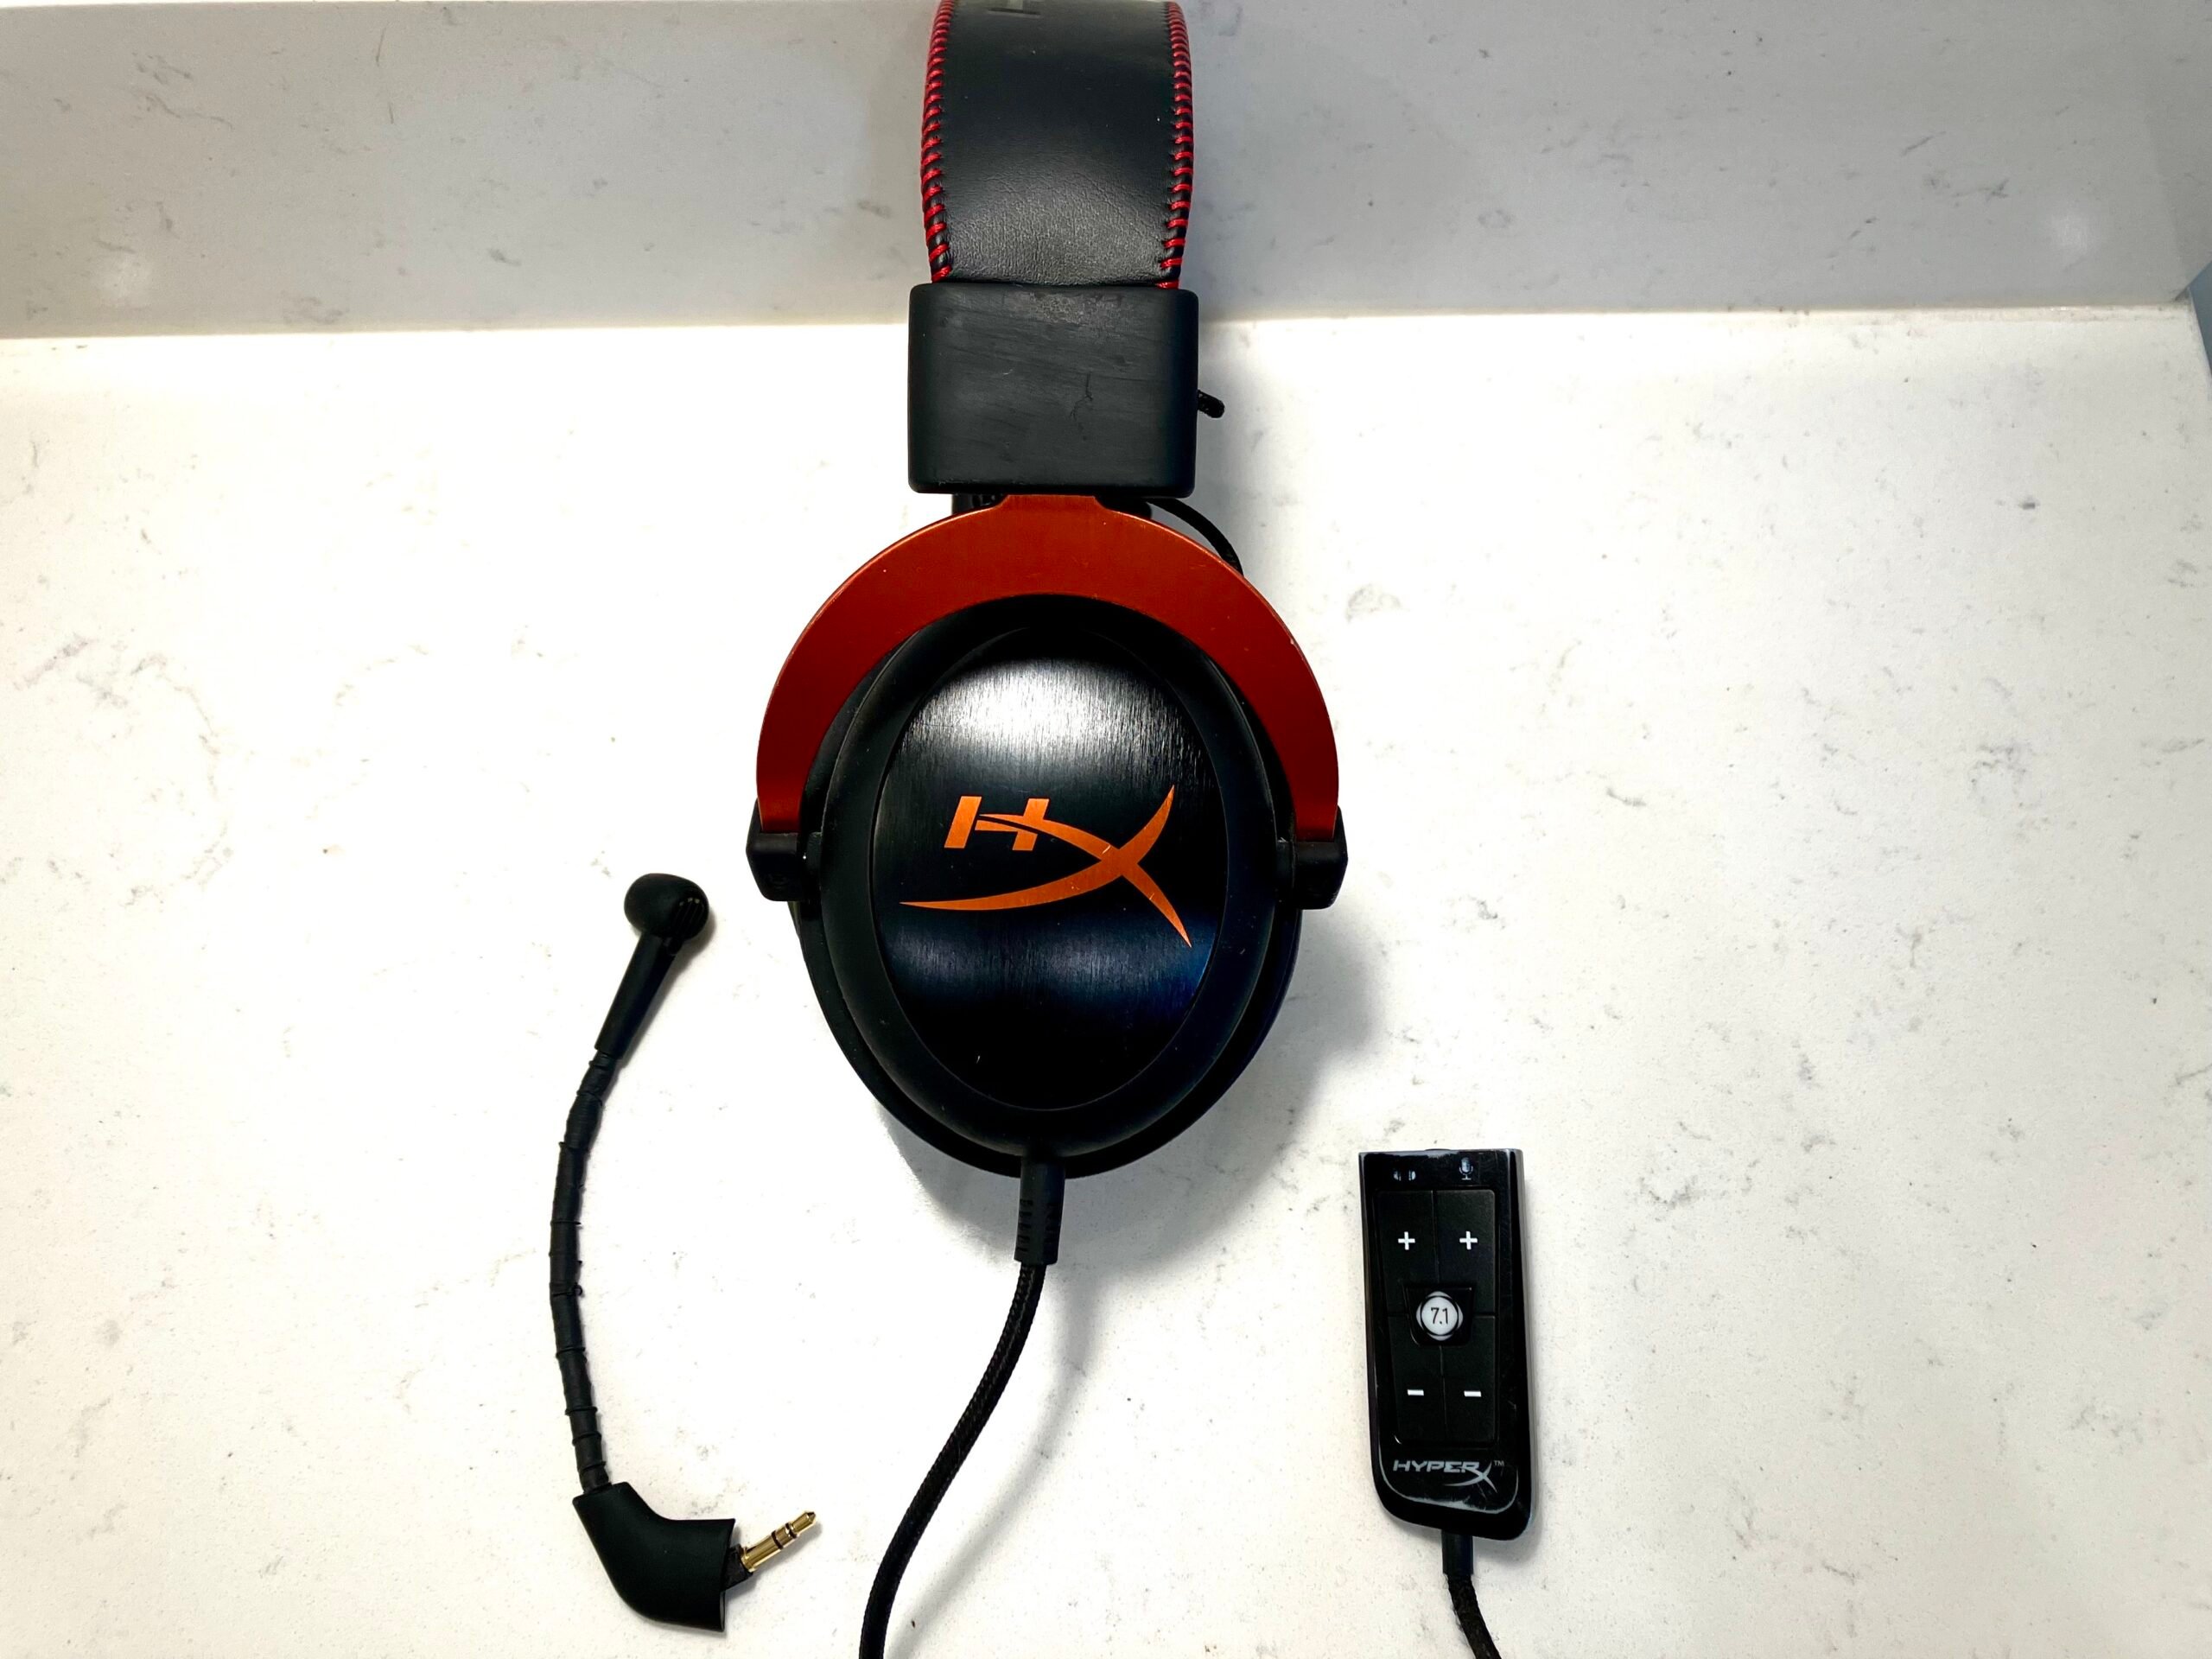 Plante træer desinficere Hårdhed Gaming Review: HyperX Cloud II - Tried, True, and Reliable - Headphonesty